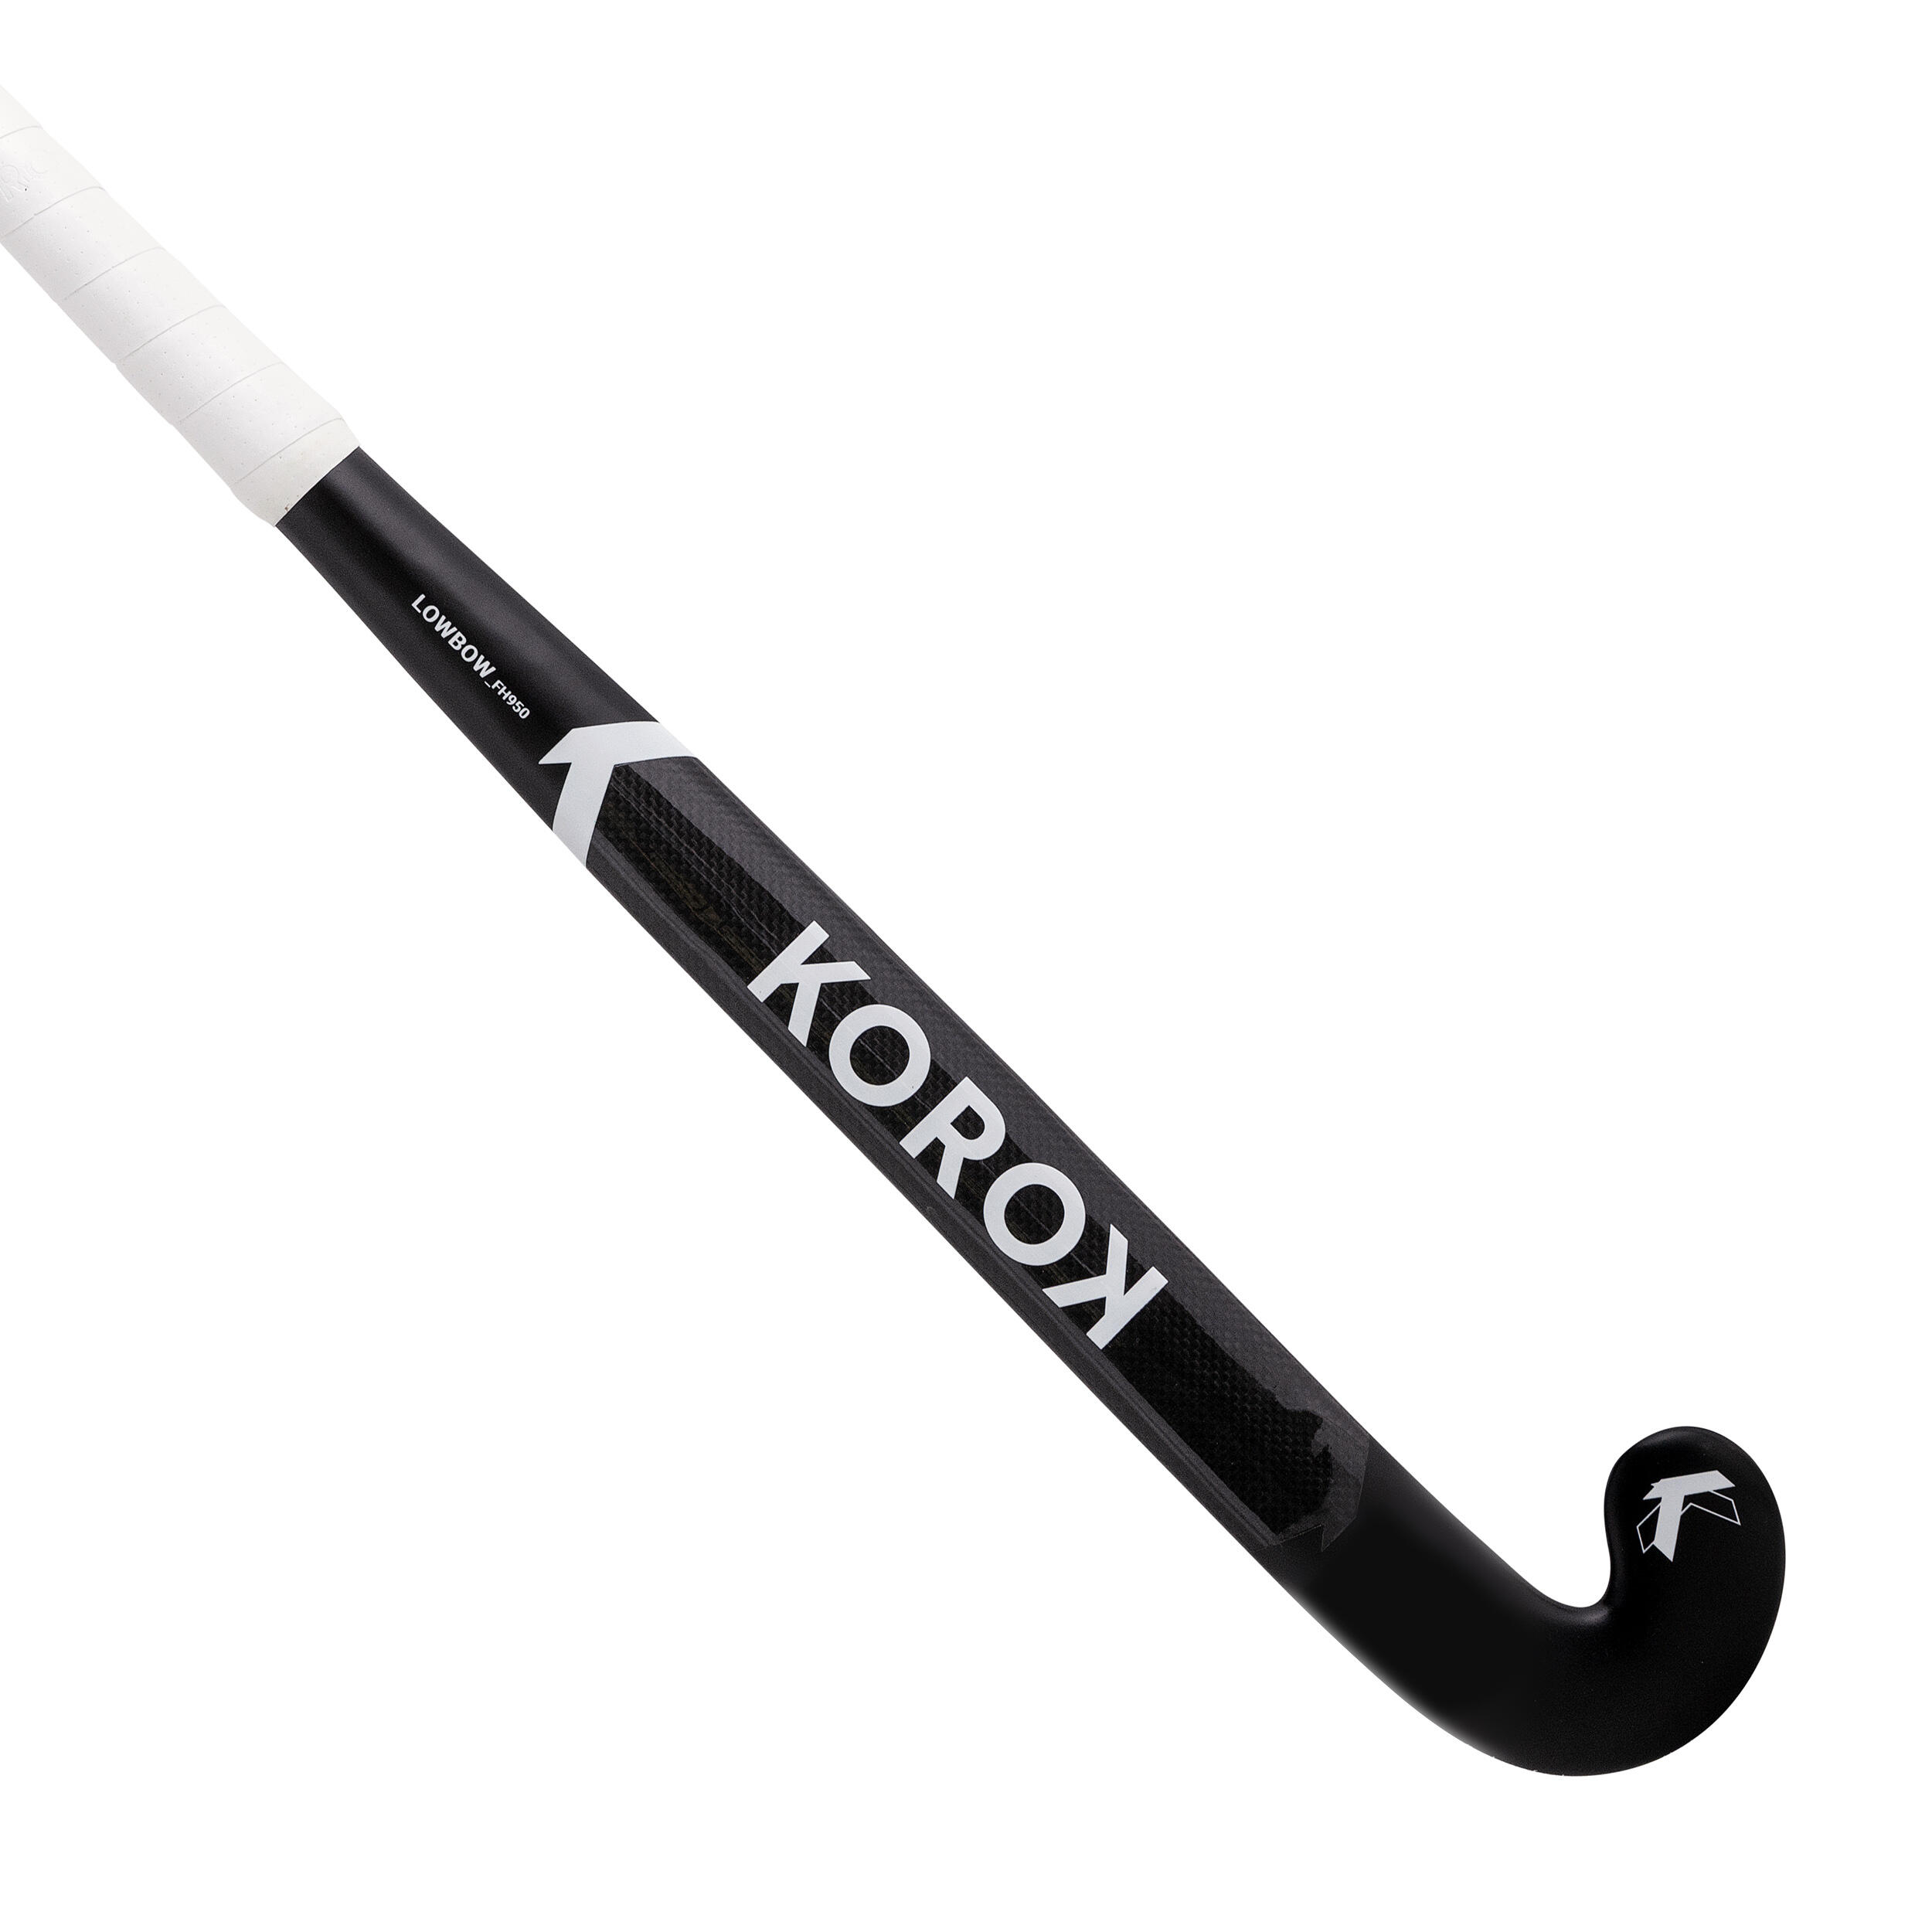 KOROK Adult Advanced 50% Carbon Low Bow Indoor Hockey Stick FH950 - Black/White